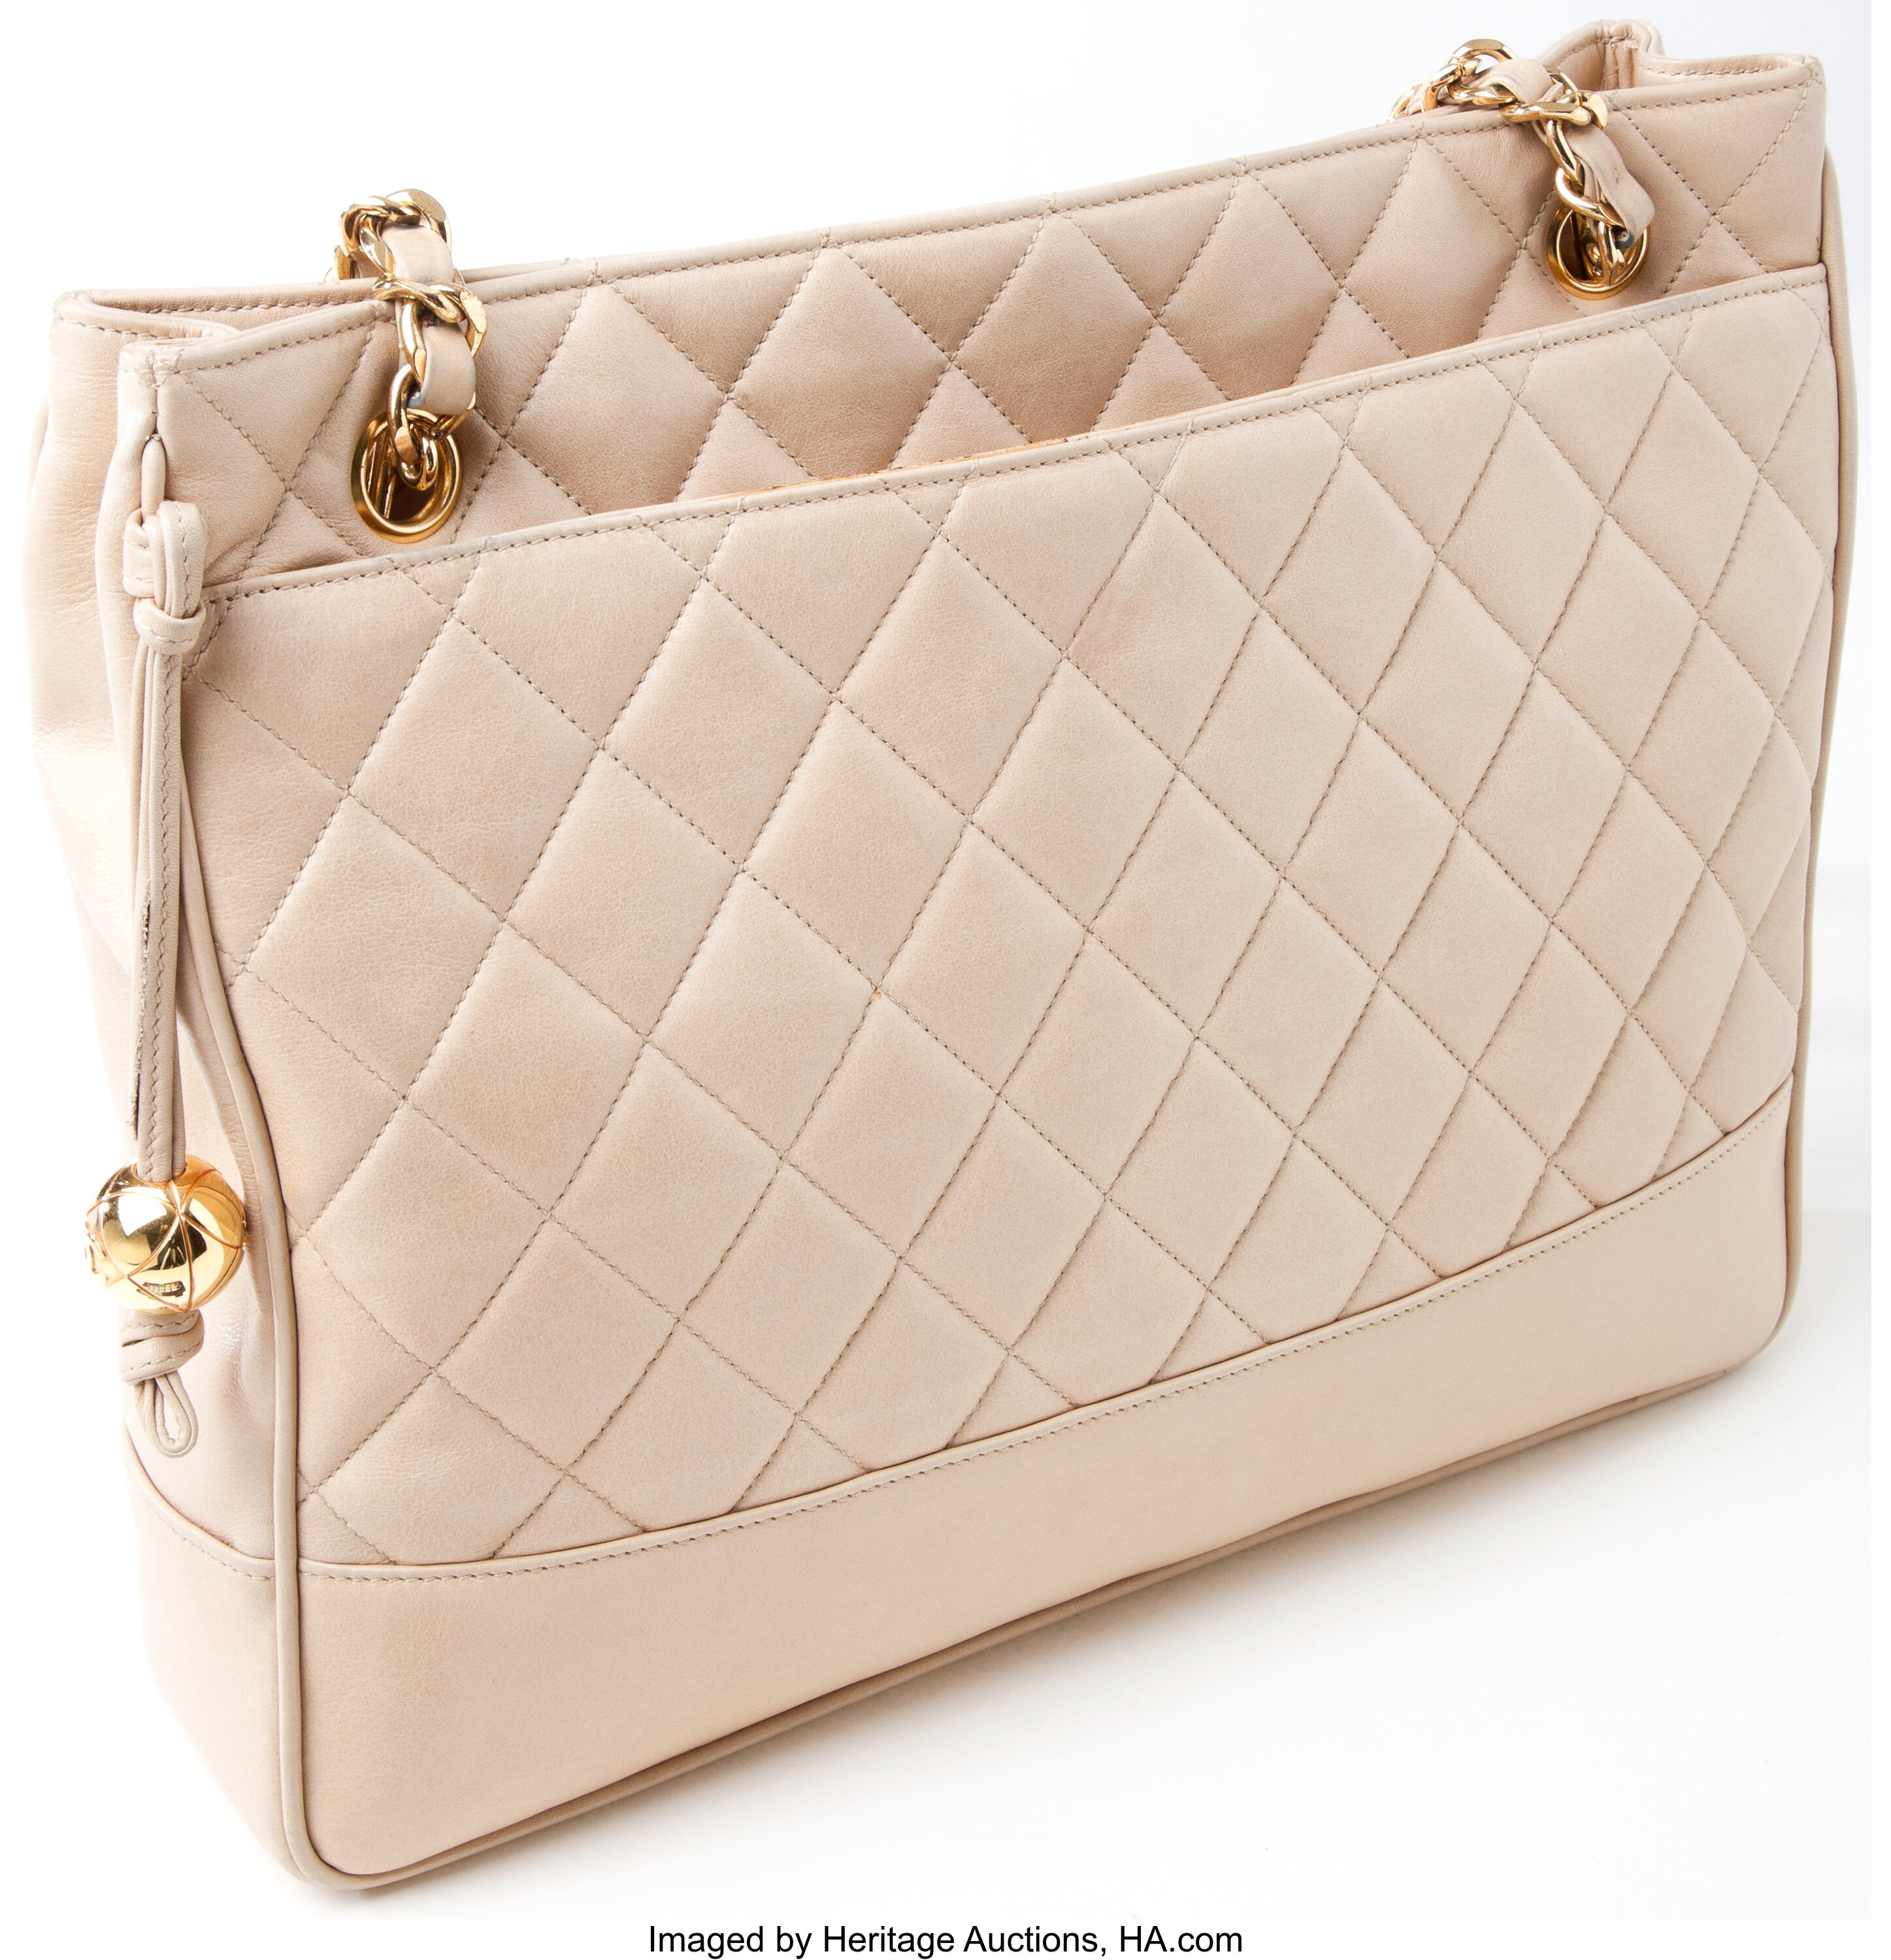 Heritage Vintage: Chanel Beige Quilted Lambskin Leather Bag